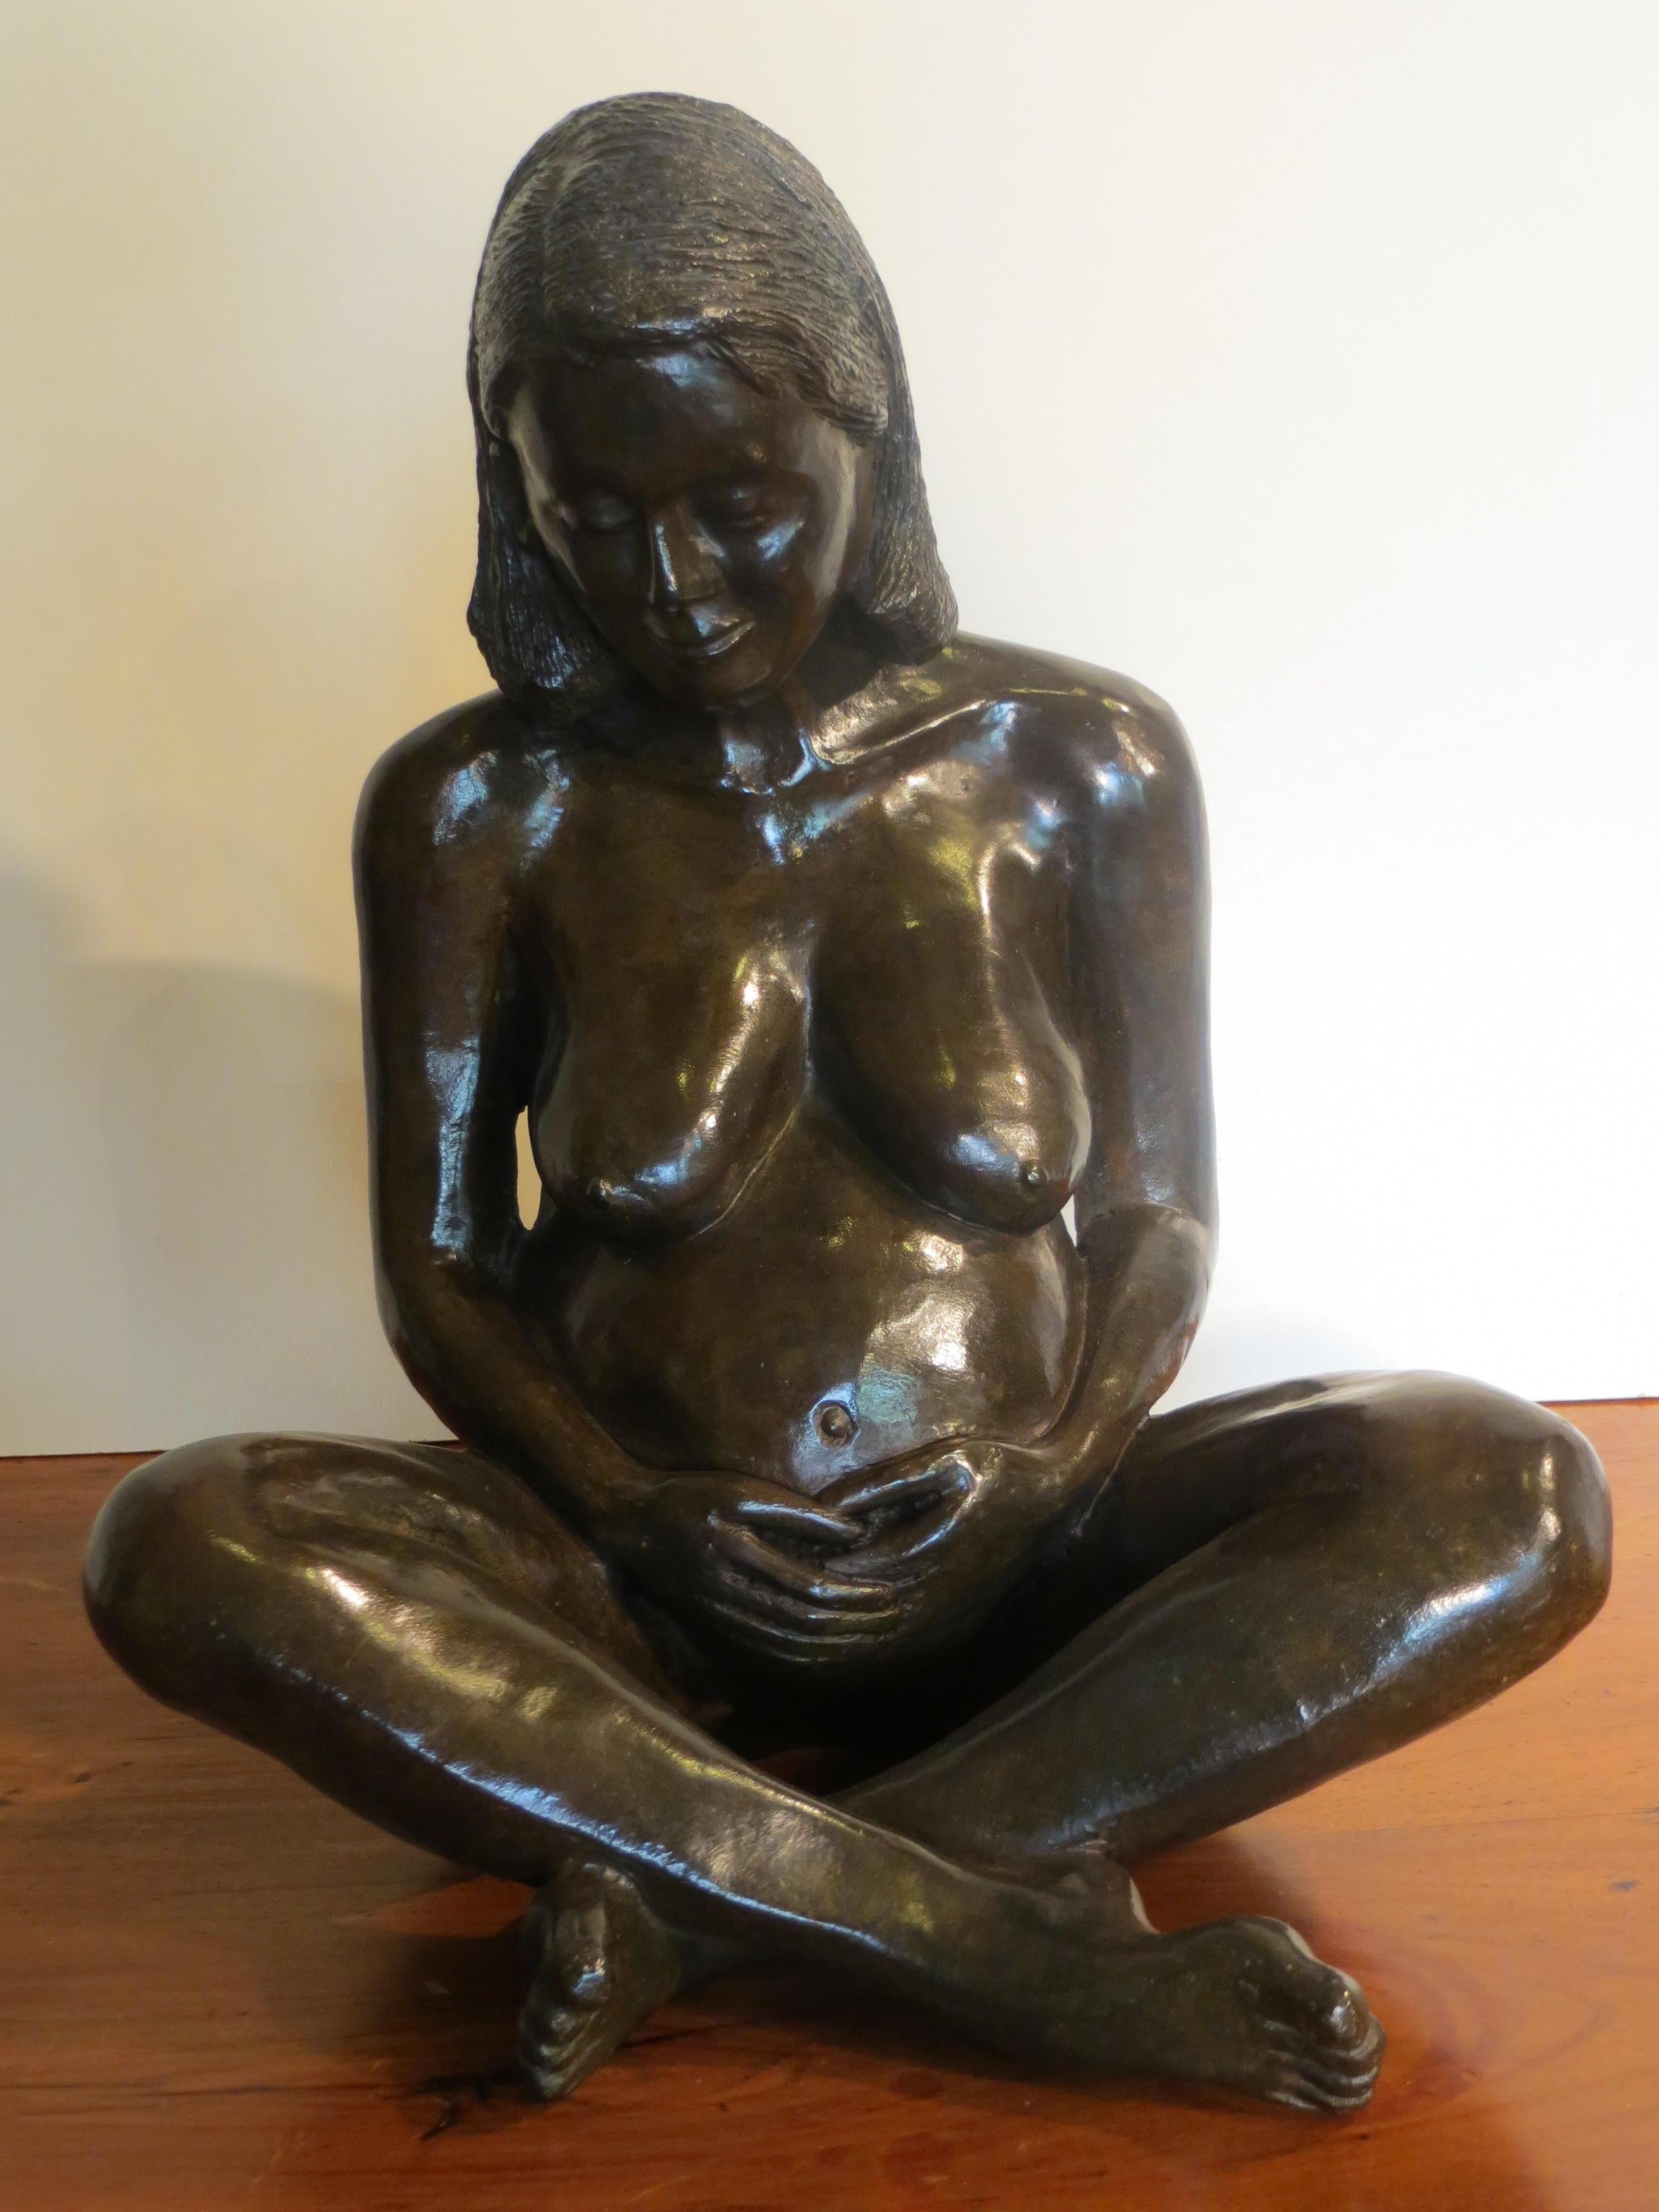 Maternity - Sculpture by Patrick Brun